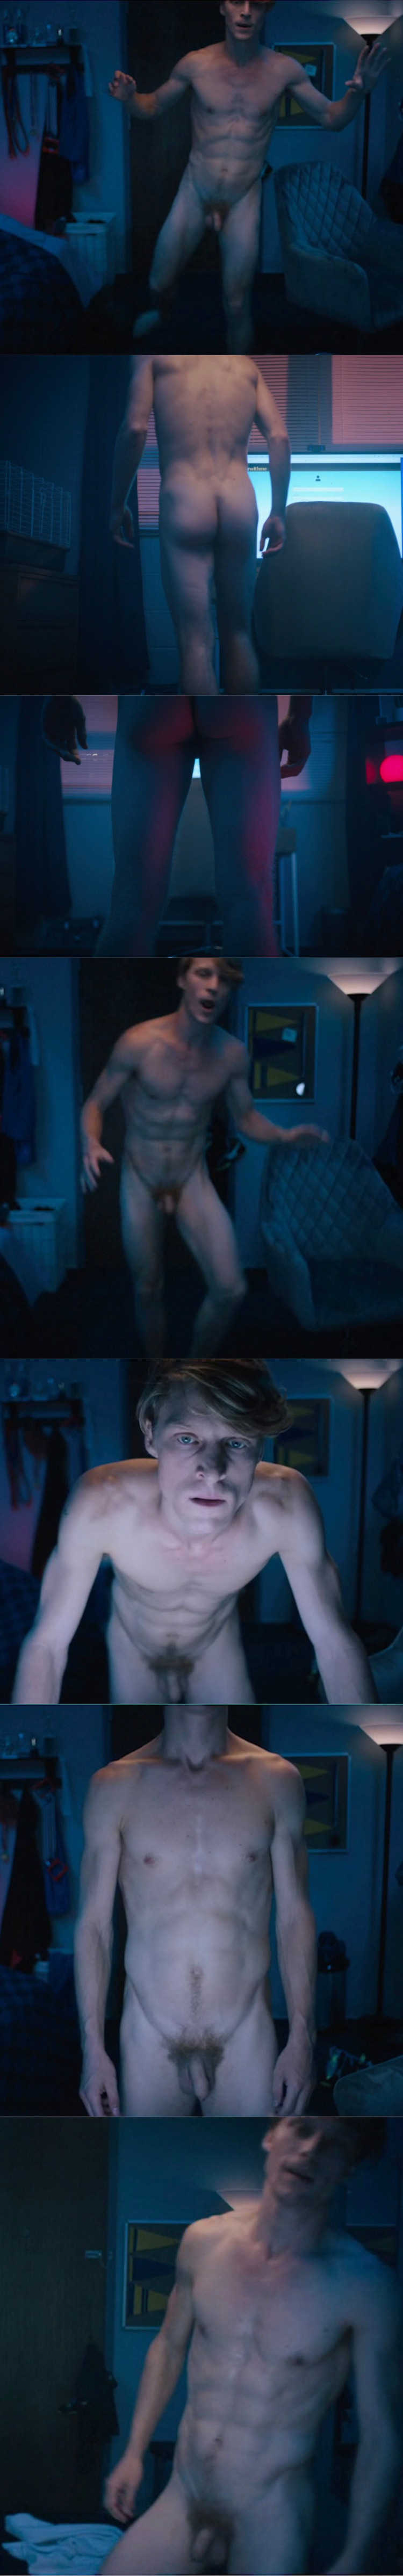 Colin Bates full frontal naked in a movie